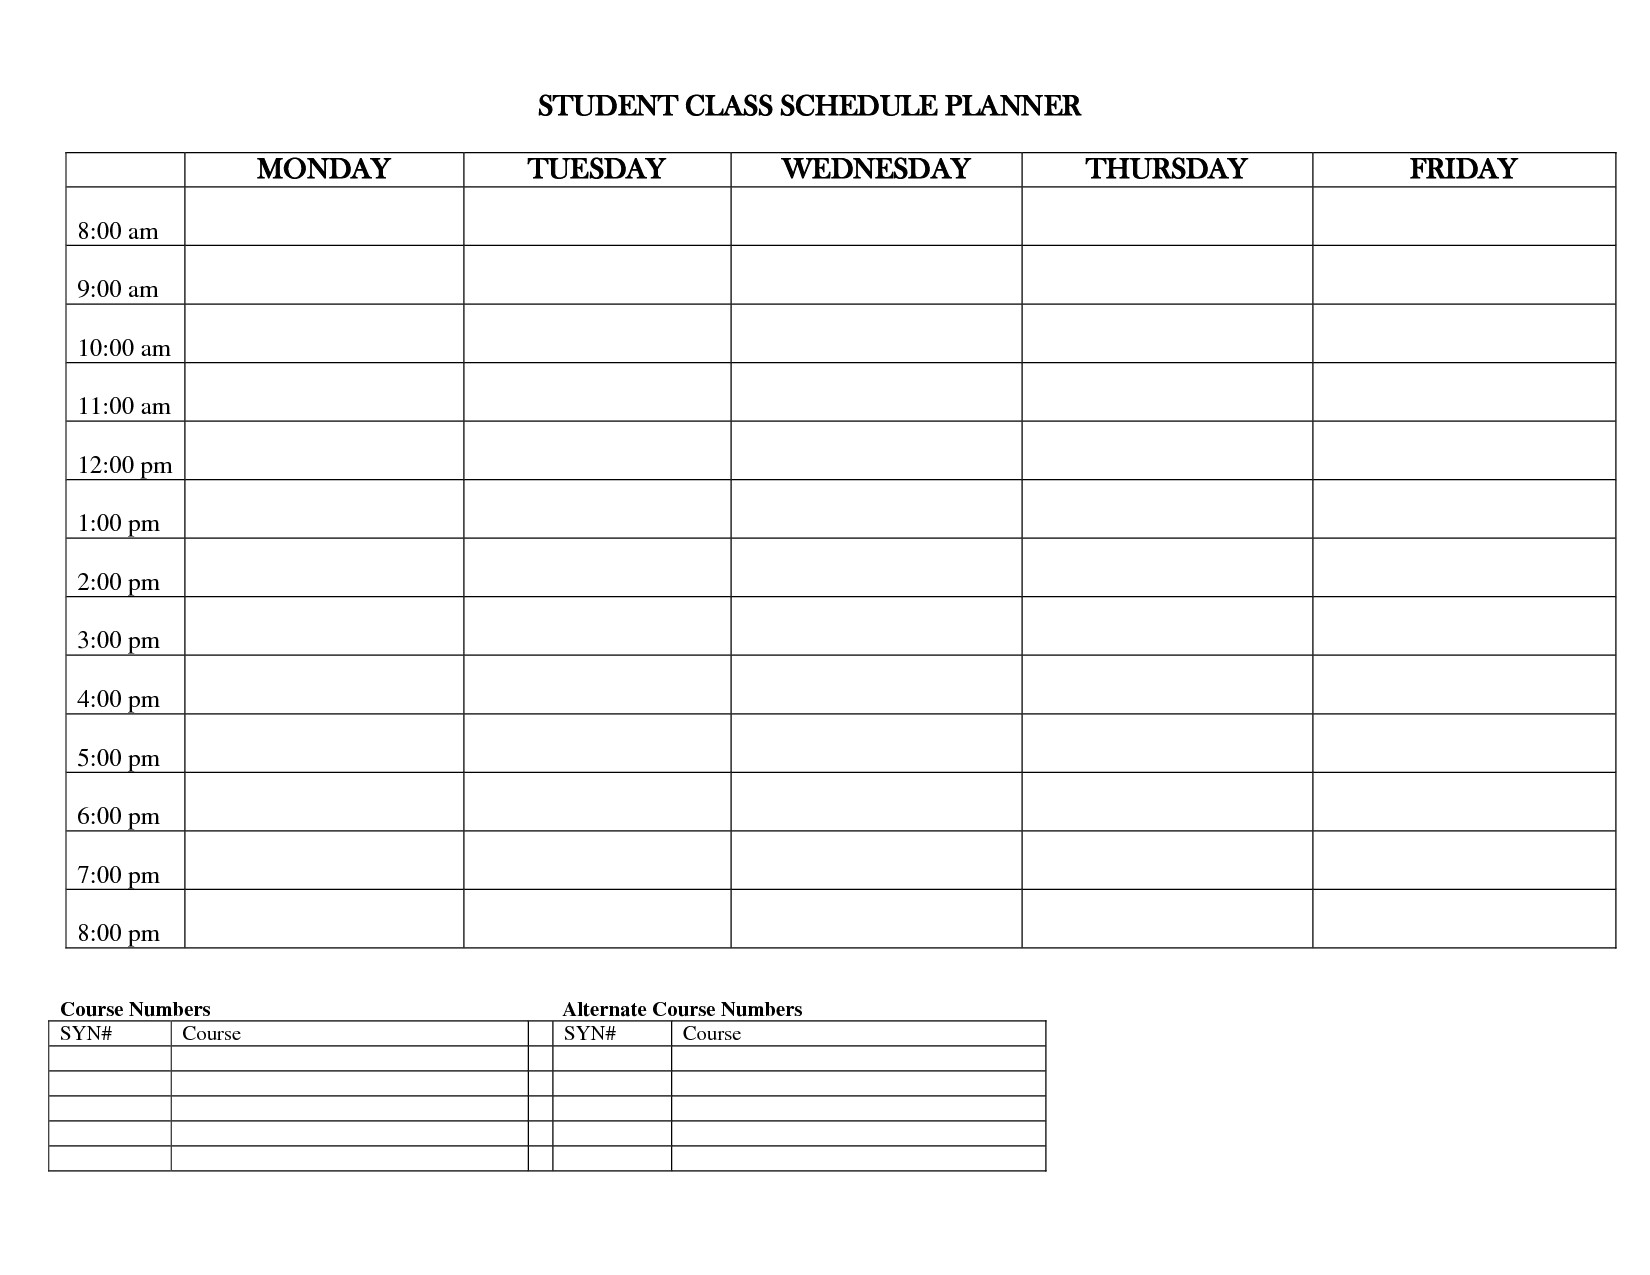 Weekly Class Schedule Template Kids Awesome Schedule Planner Line Ideas Myltio